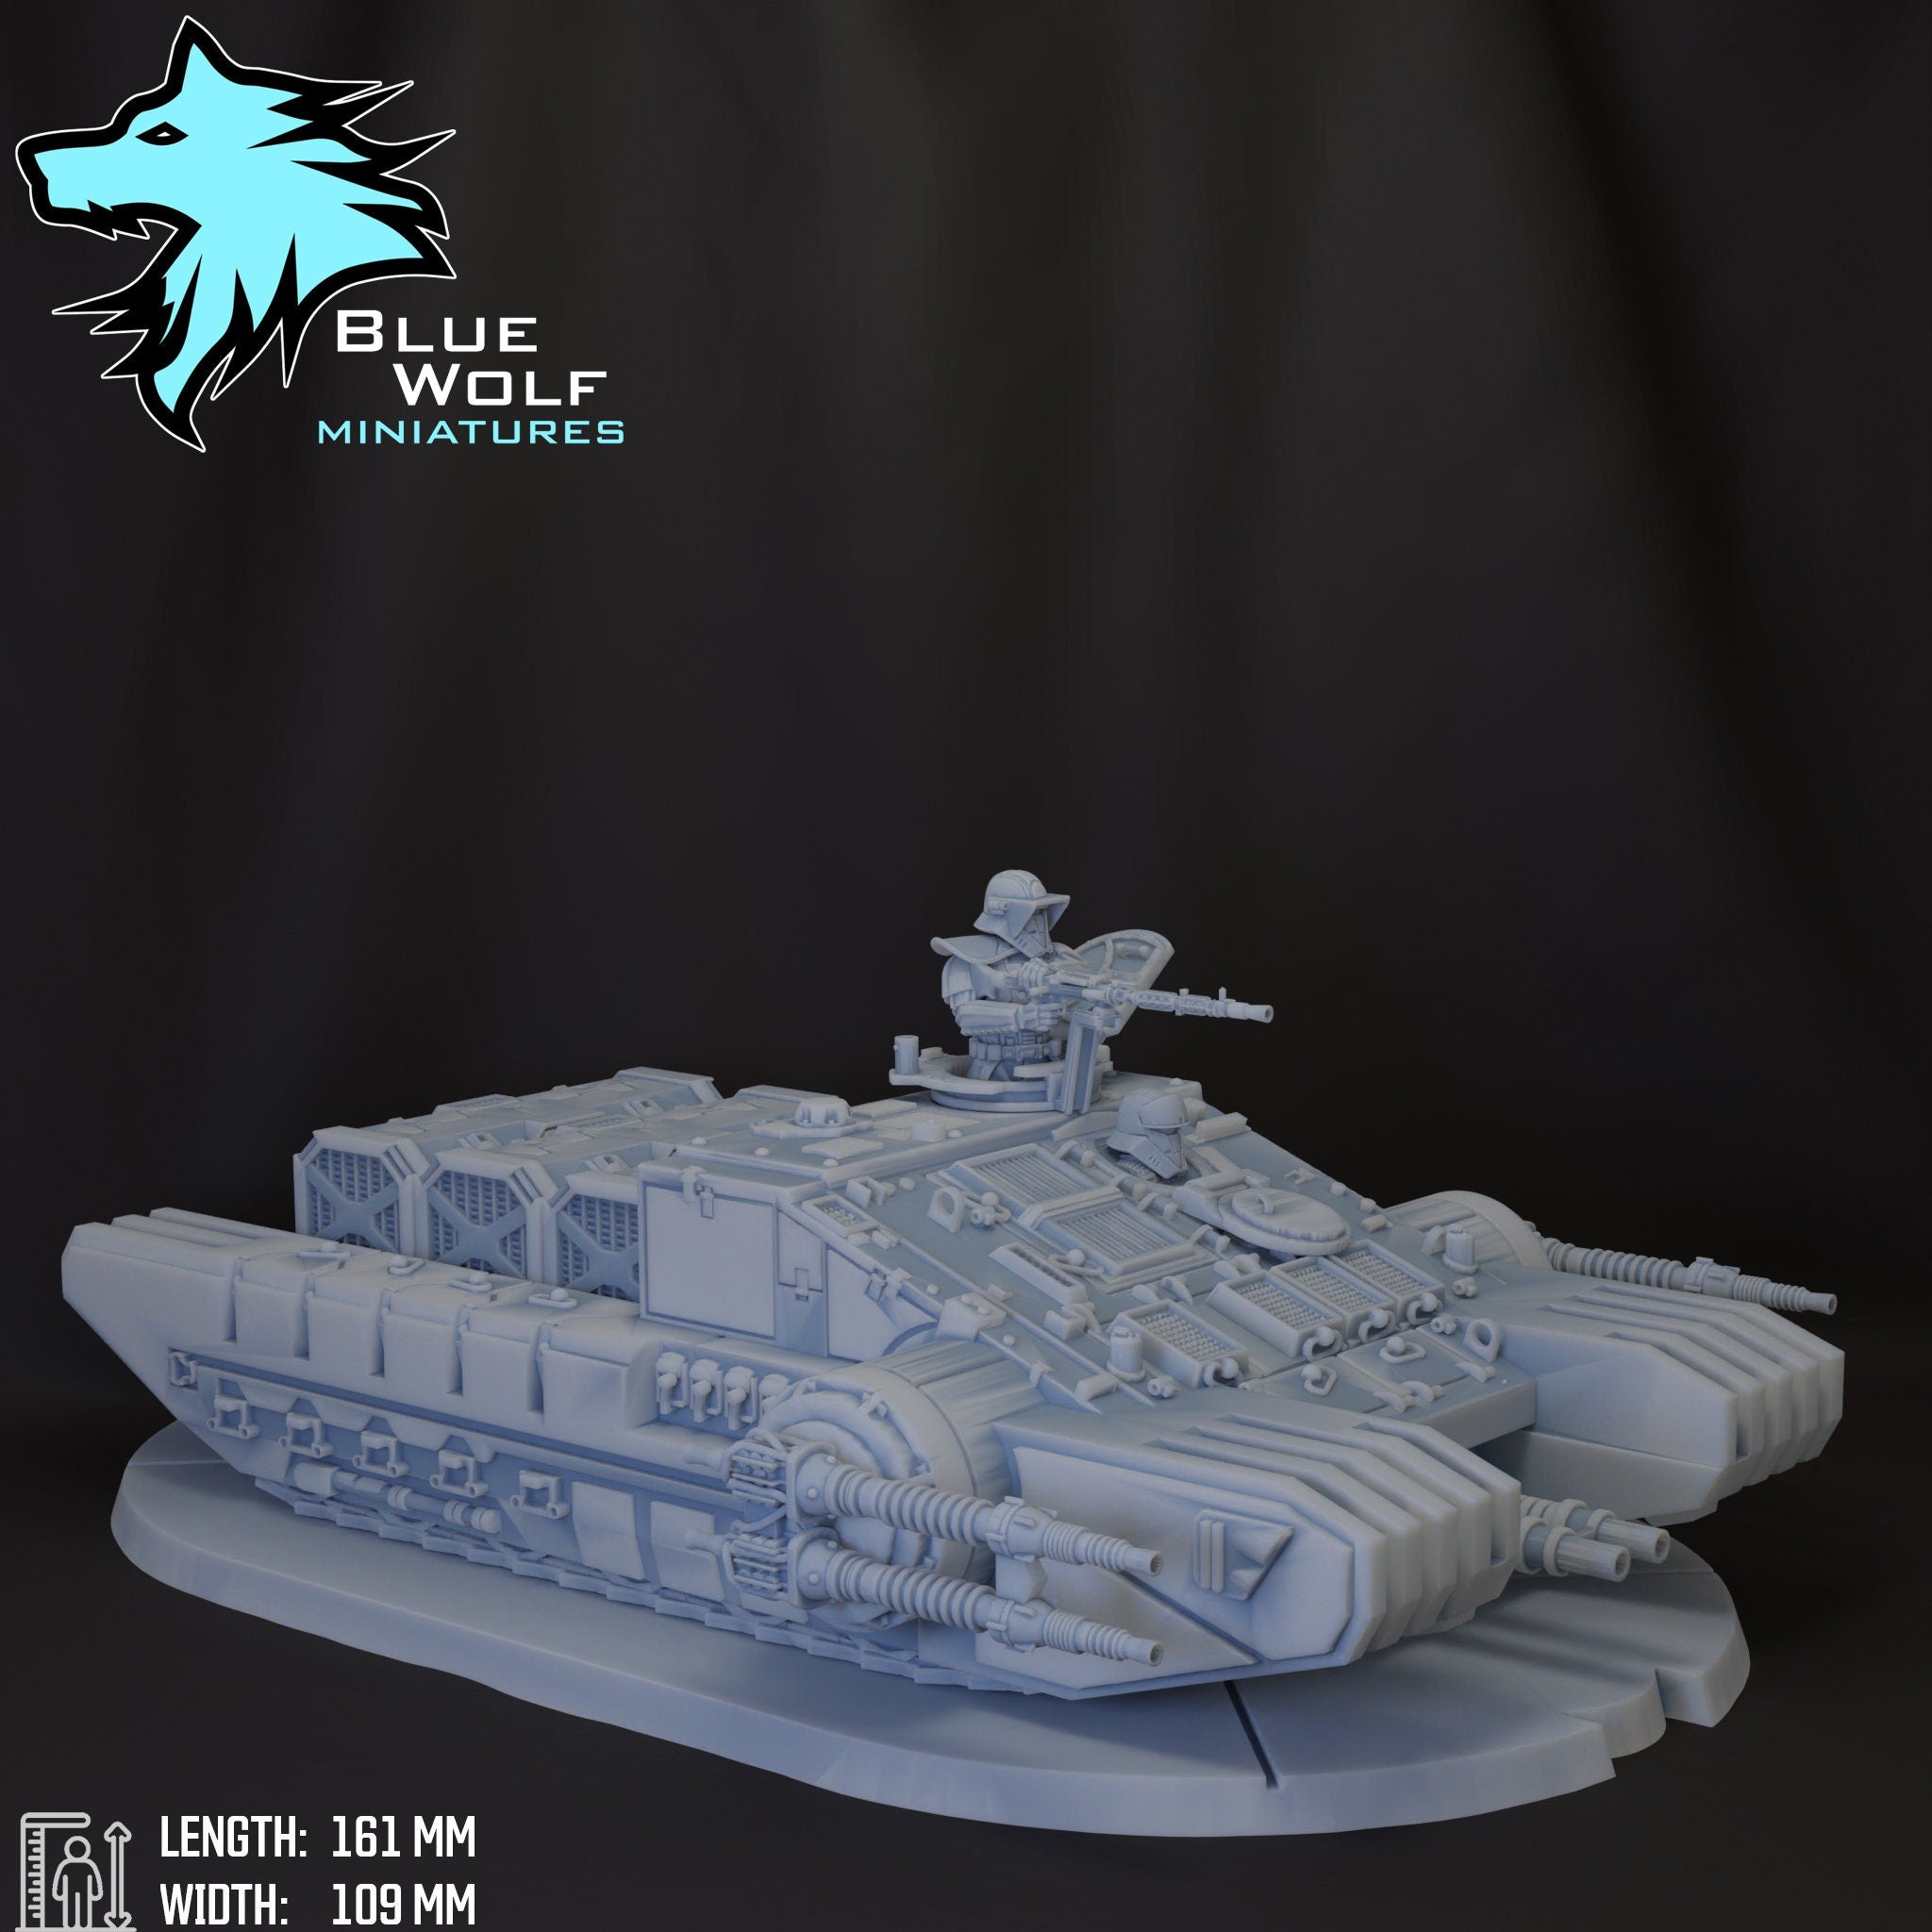 TX-225 ‧ Blue Wolf Miniatures ‧ 1:48 Scale ‧ 35mm.